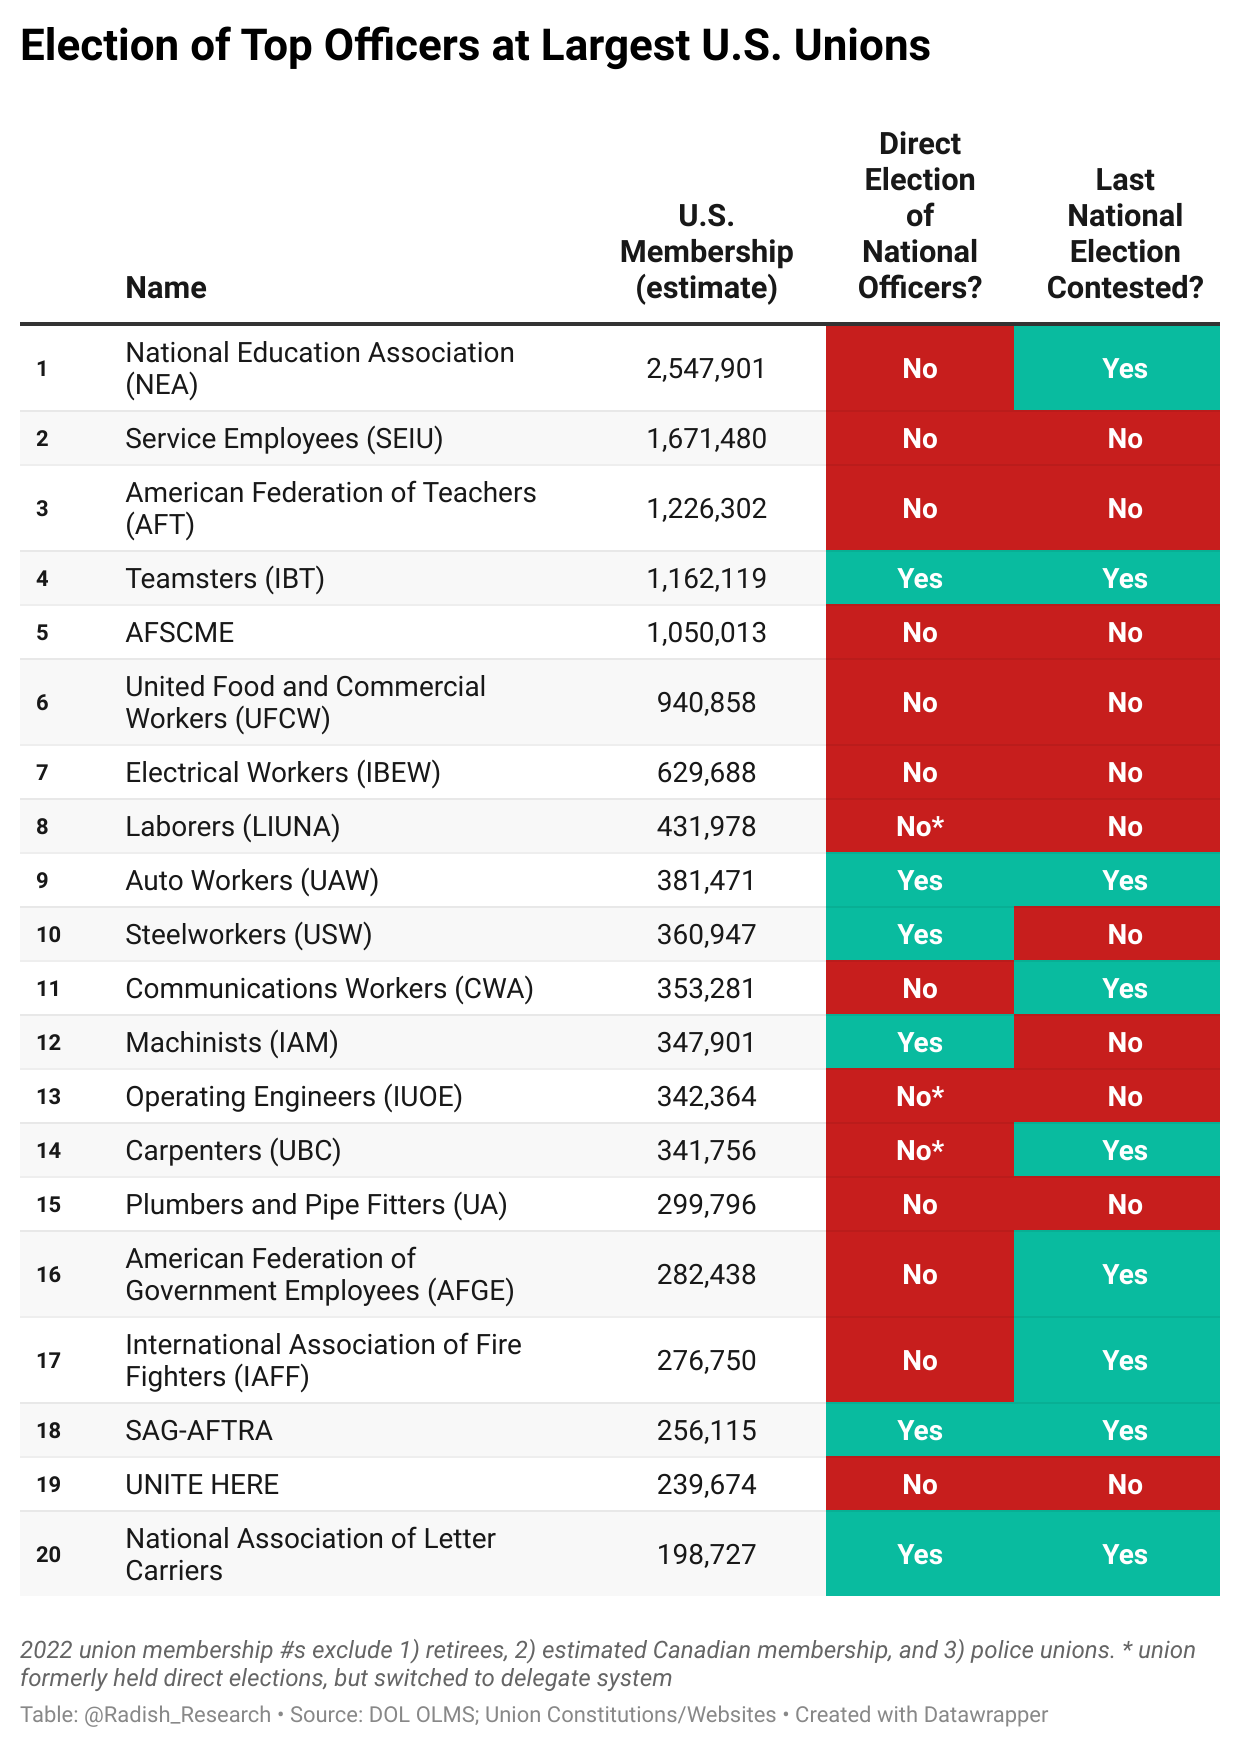 Election of Officers at Large U.S. Unions: Table of 20 largest unions by number of members, starting with the NEA, SEIU, AFT, IBT, and AFSCME. Three columns show estimated 2022 membership and yes (green)/no (red) on two factors: Direct election of national top officers? And Last national election contested?, showing a correlation.